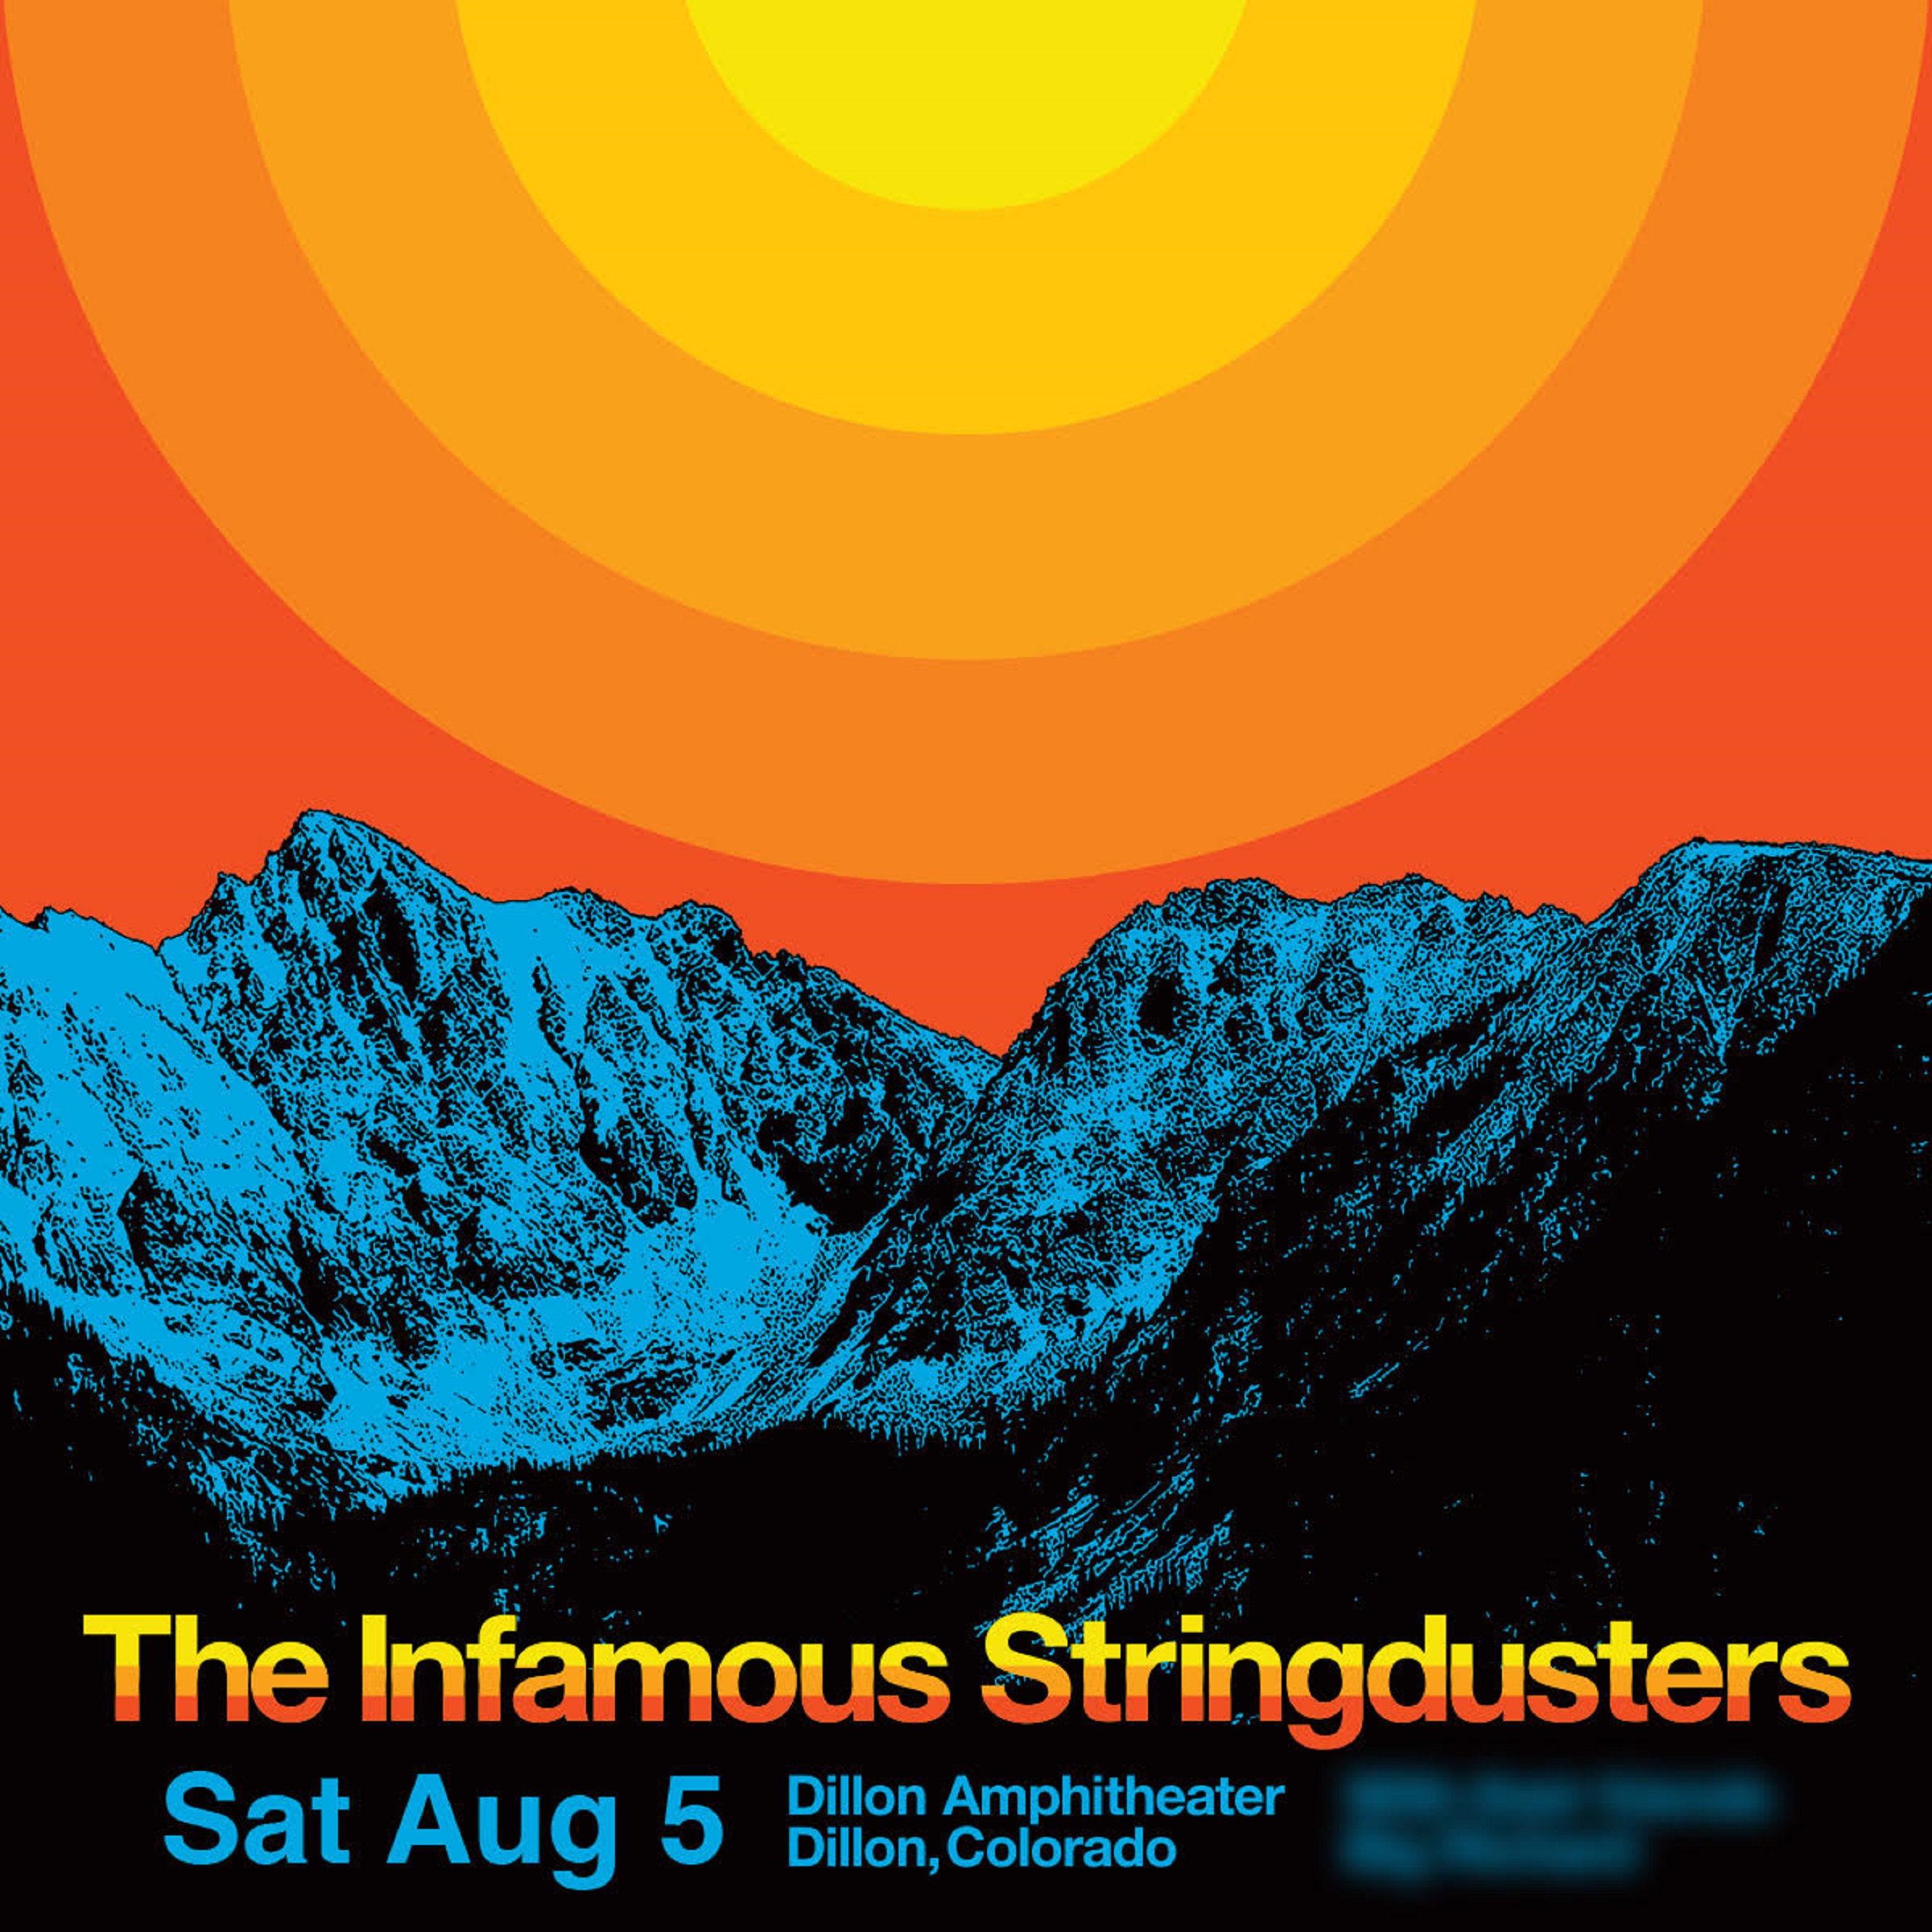 THE INFAMOUS STRINGDUSTERS live at Dillon Amphitheater on Saturday, August 5, 2023